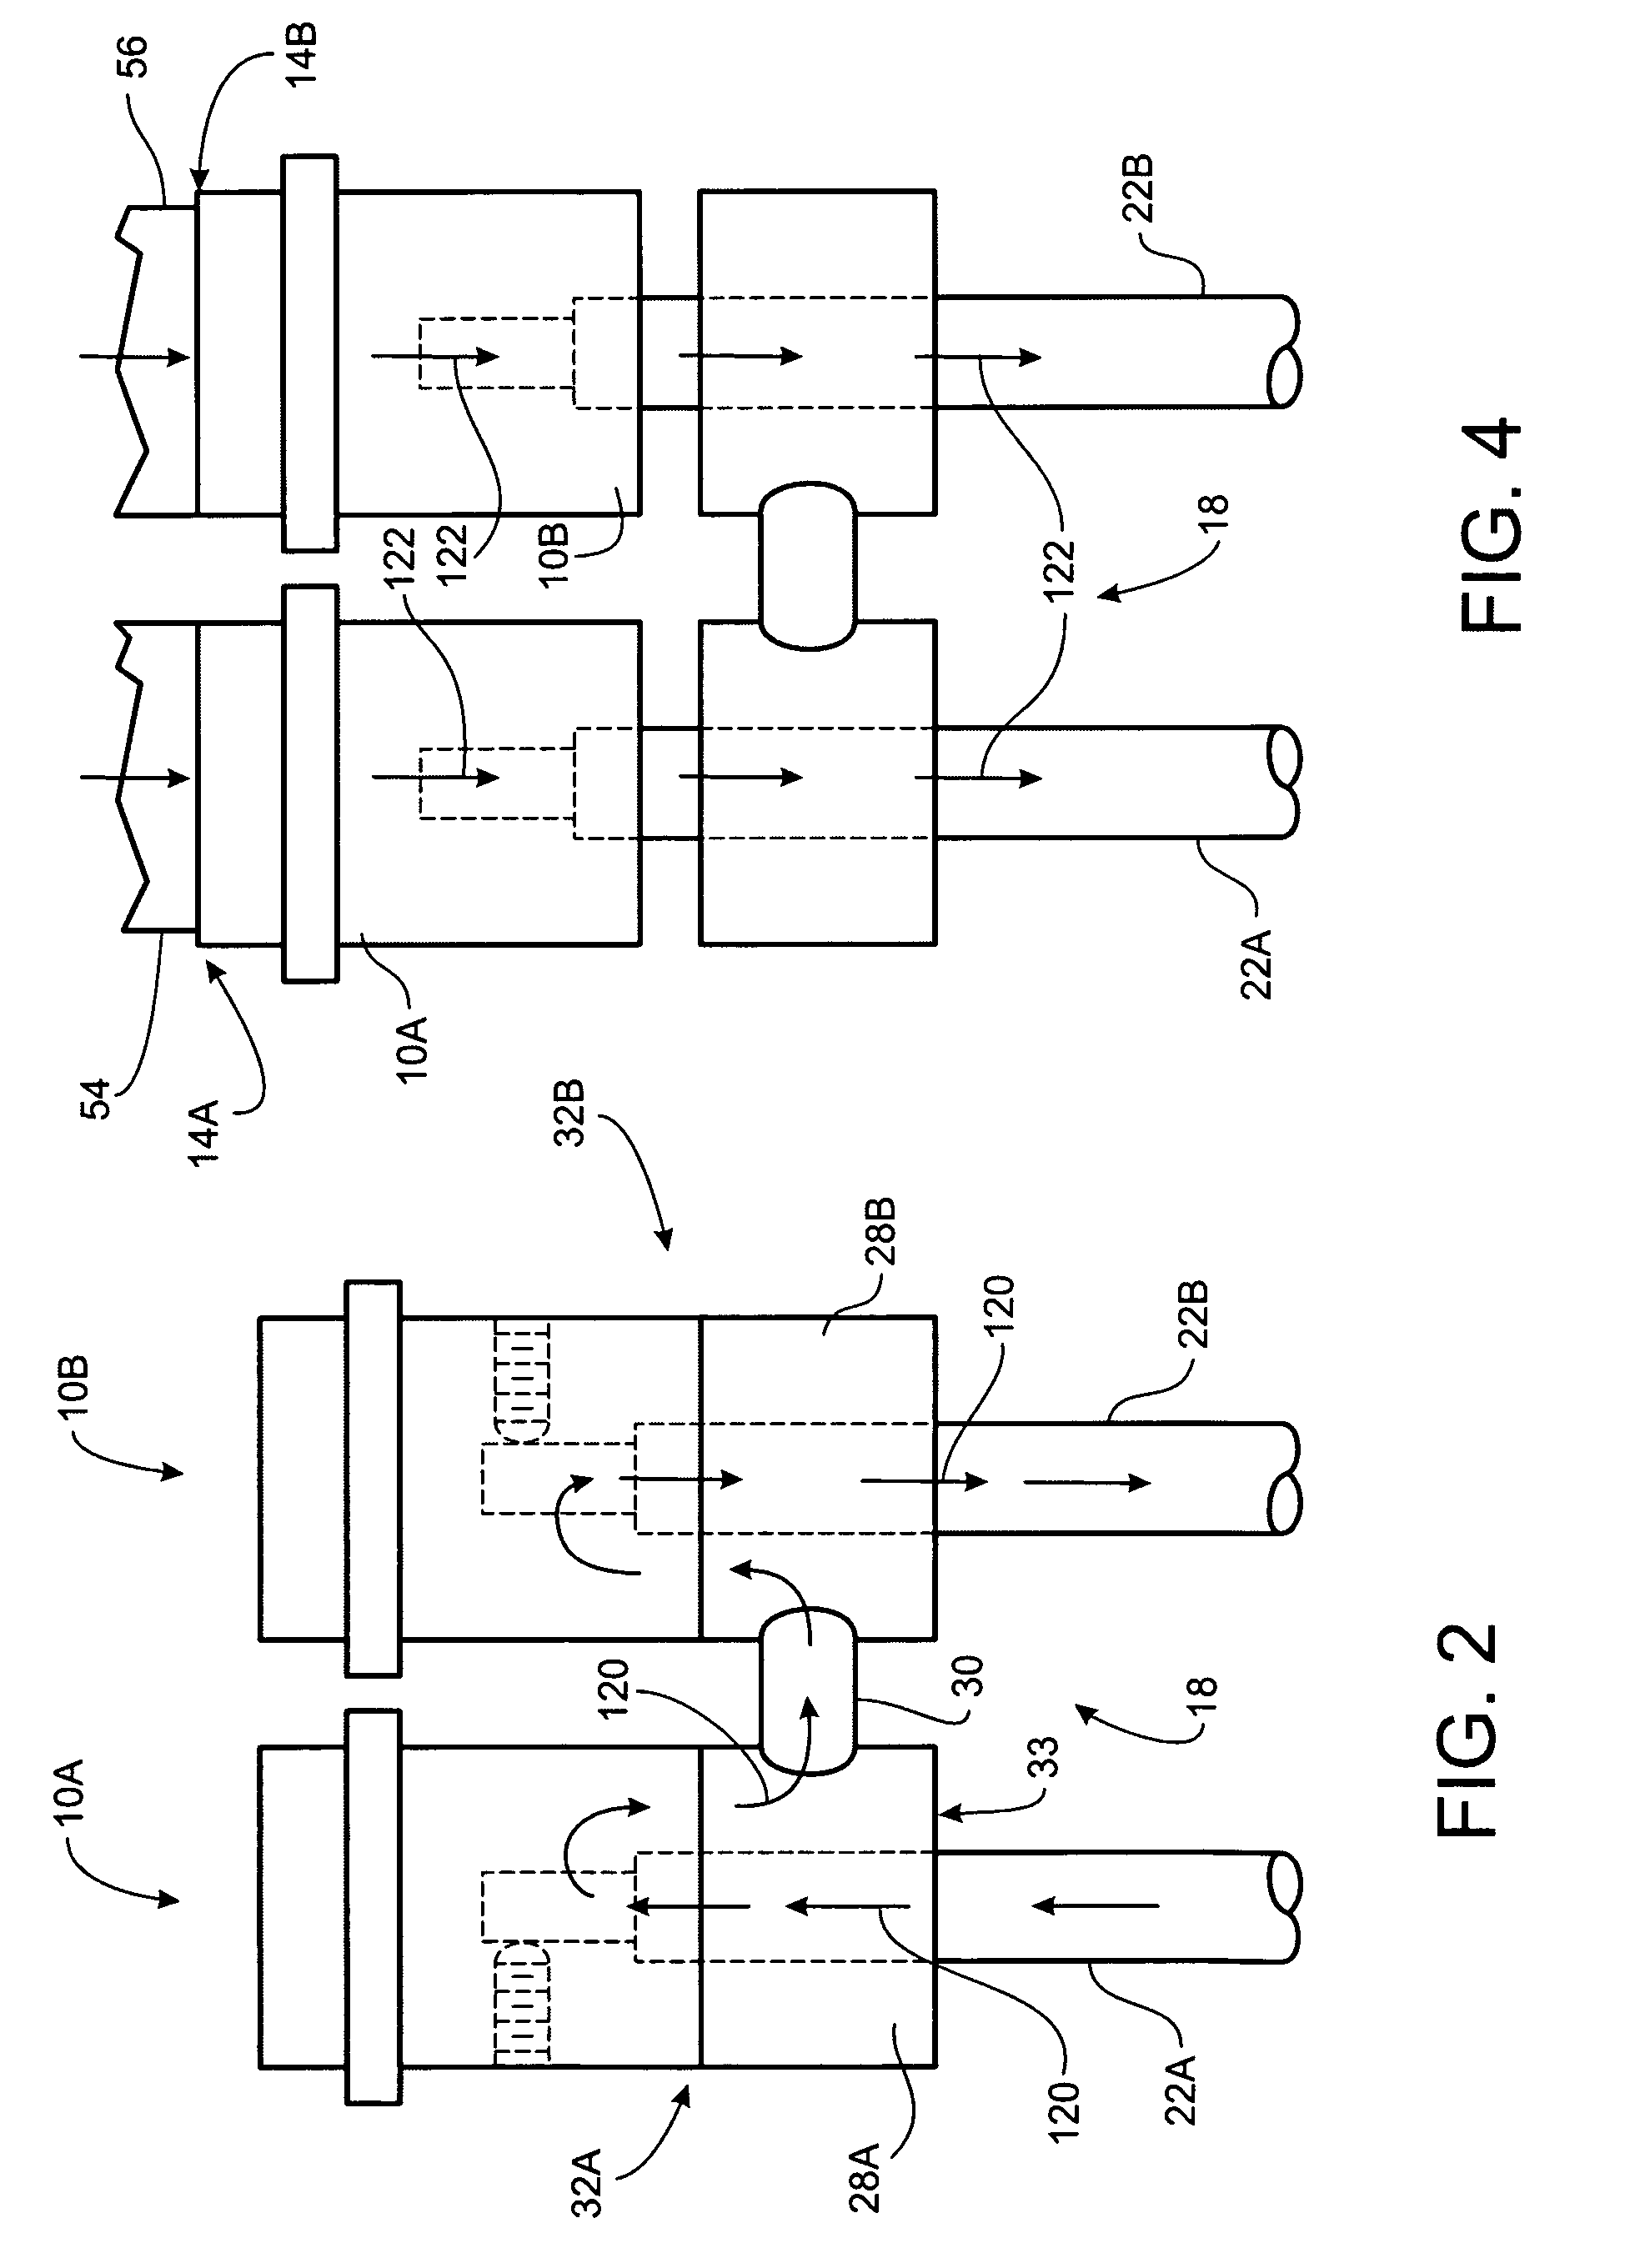 Charging contact array for enabling parallel charging and series discharging of batteries